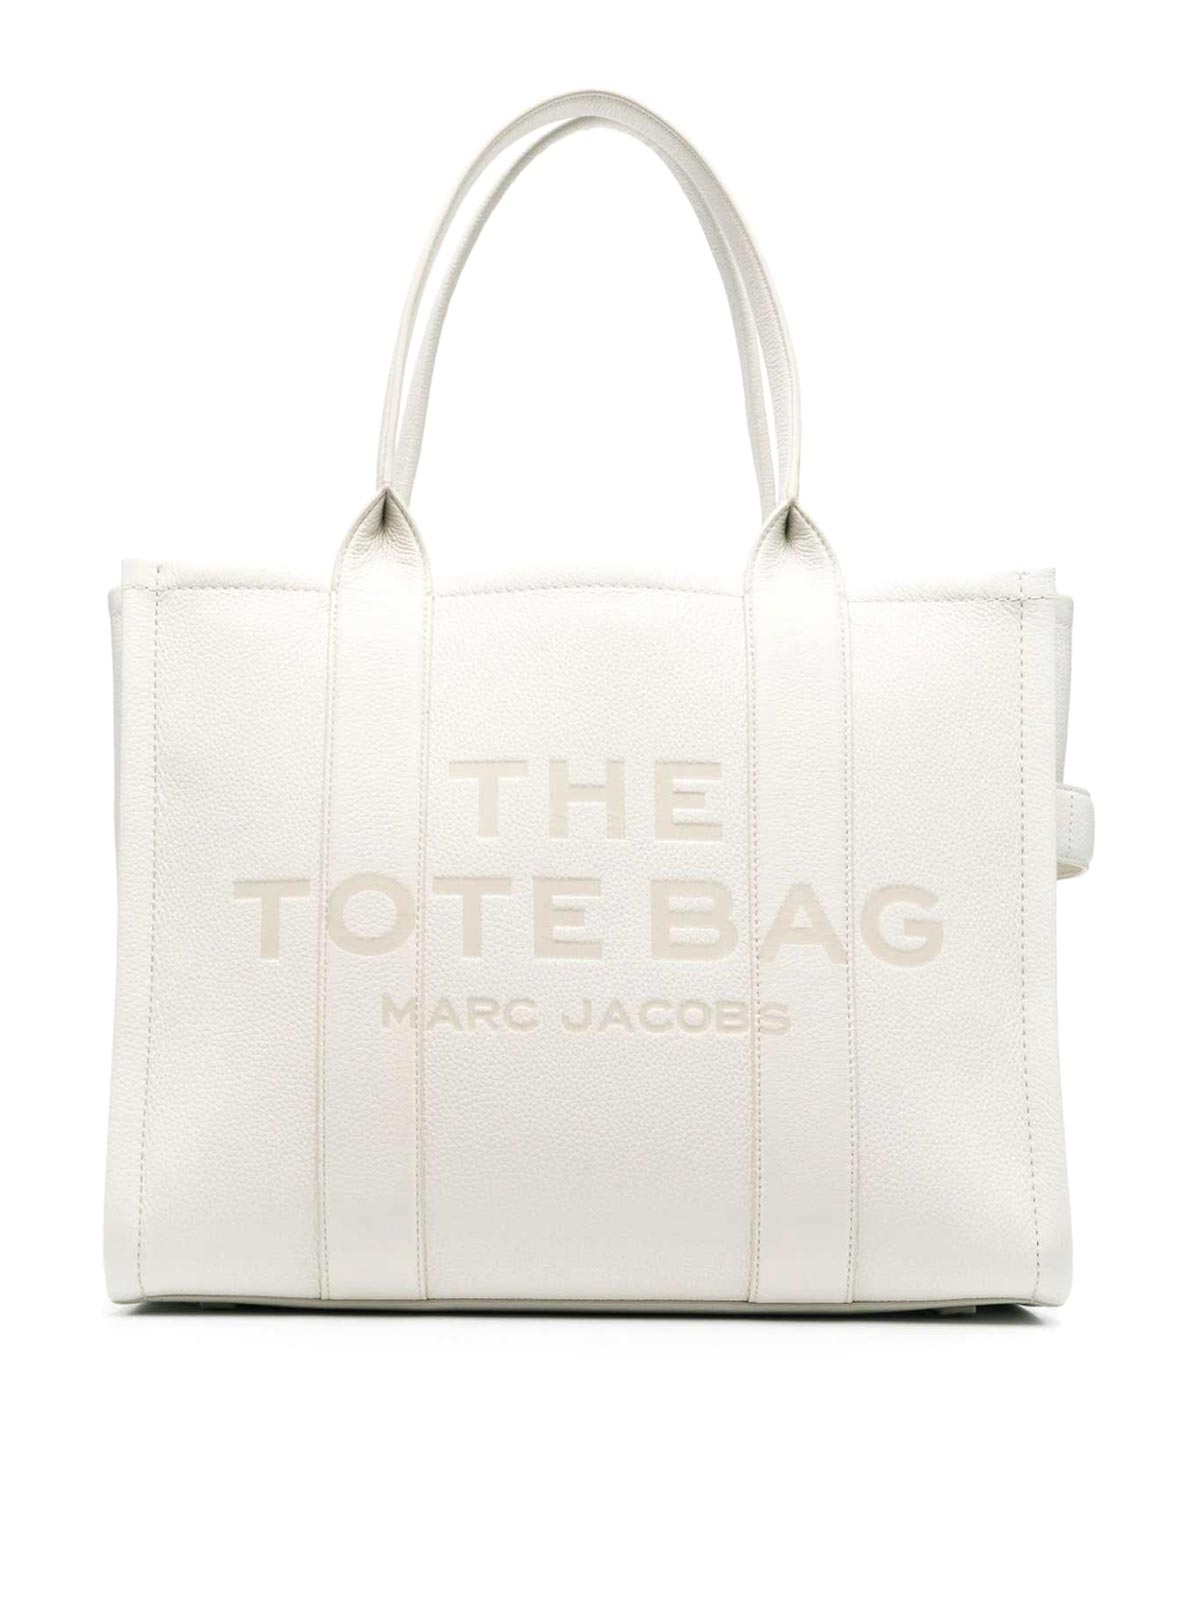 Marc Jacobs Large Tote Bag In White